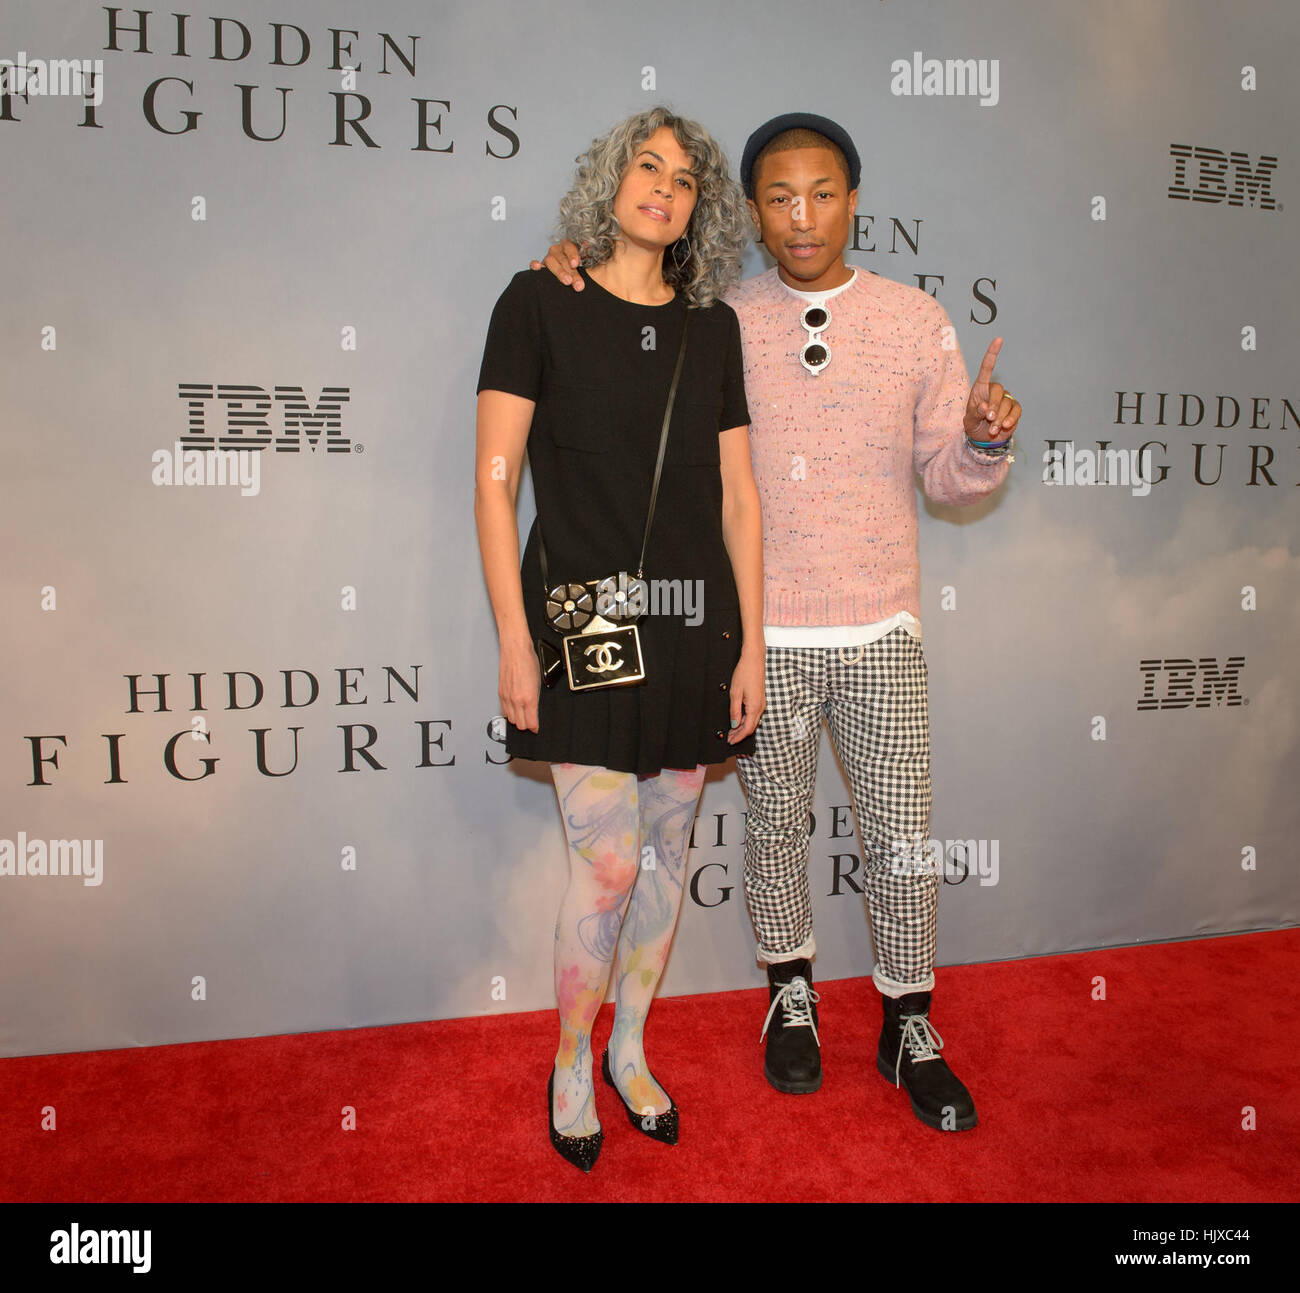 Producer Mimi Valdés and American singer-songwriter Pharrell Williams arrive on the red carpet for the global celebration of the film &quot;Hidden Figures&quot; at the SVA Theatre, Saturday, Dec. 10, 2016 in New York. The film is based on the book of the same title, by Margot Lee Shetterly, and chronicles the lives of Katherine Johnson, Dorothy Vaughan and Mary Jackson -- African-American women working at NASA as “human computers,” who were critical to the success of John Glenn’s Friendship 7 mission in 1962. Stock Photo